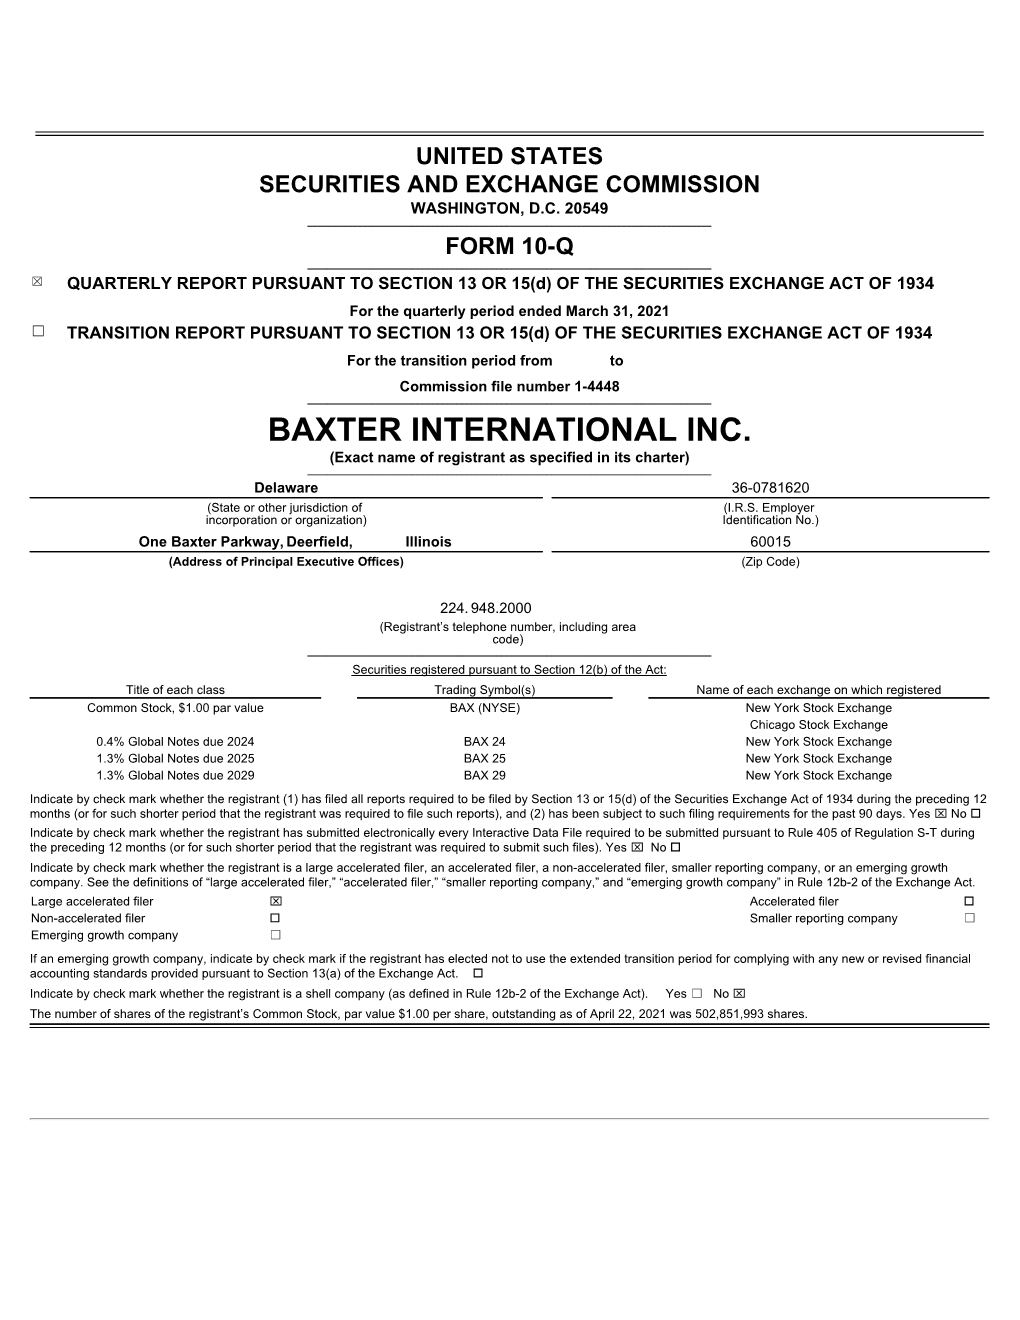 BAXTER INTERNATIONAL INC. (Exact Name of Registrant As Specified in Its Charter) ______Delaware 36-0781620 (State Or Other Jurisdiction of (I.R.S